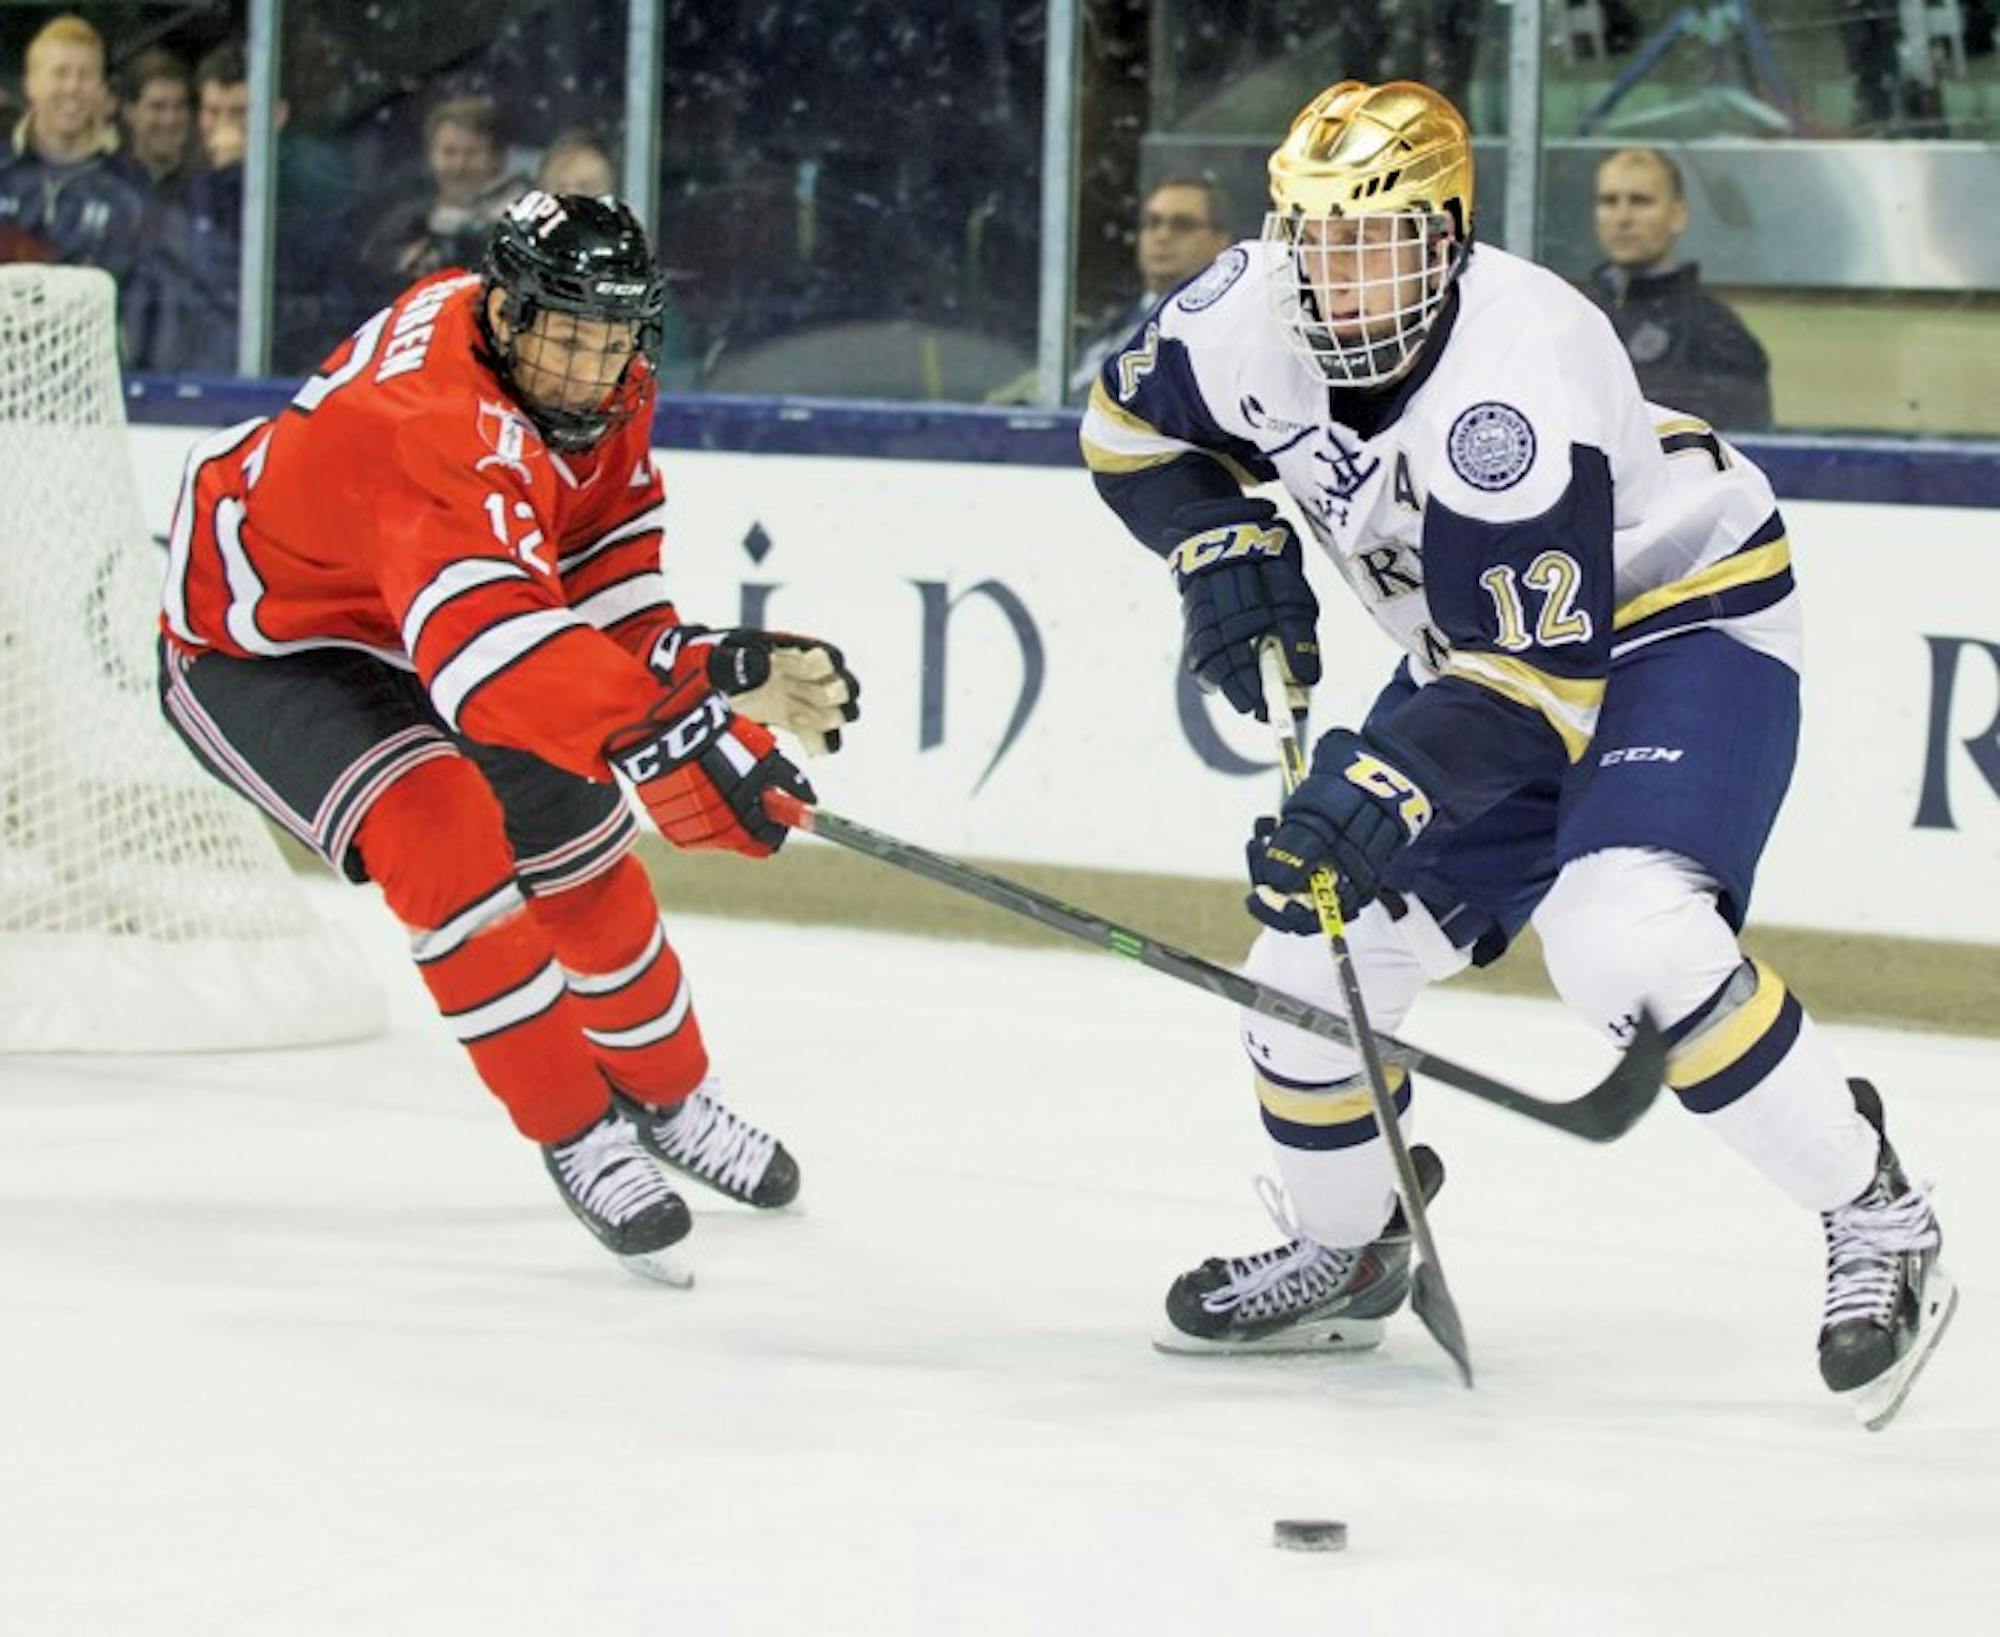 Irish junior left wing Sam Herr tries to sneak past a Rensselaer defender during Notre Dame’s 3-2 loss to the Engineers on Friday.